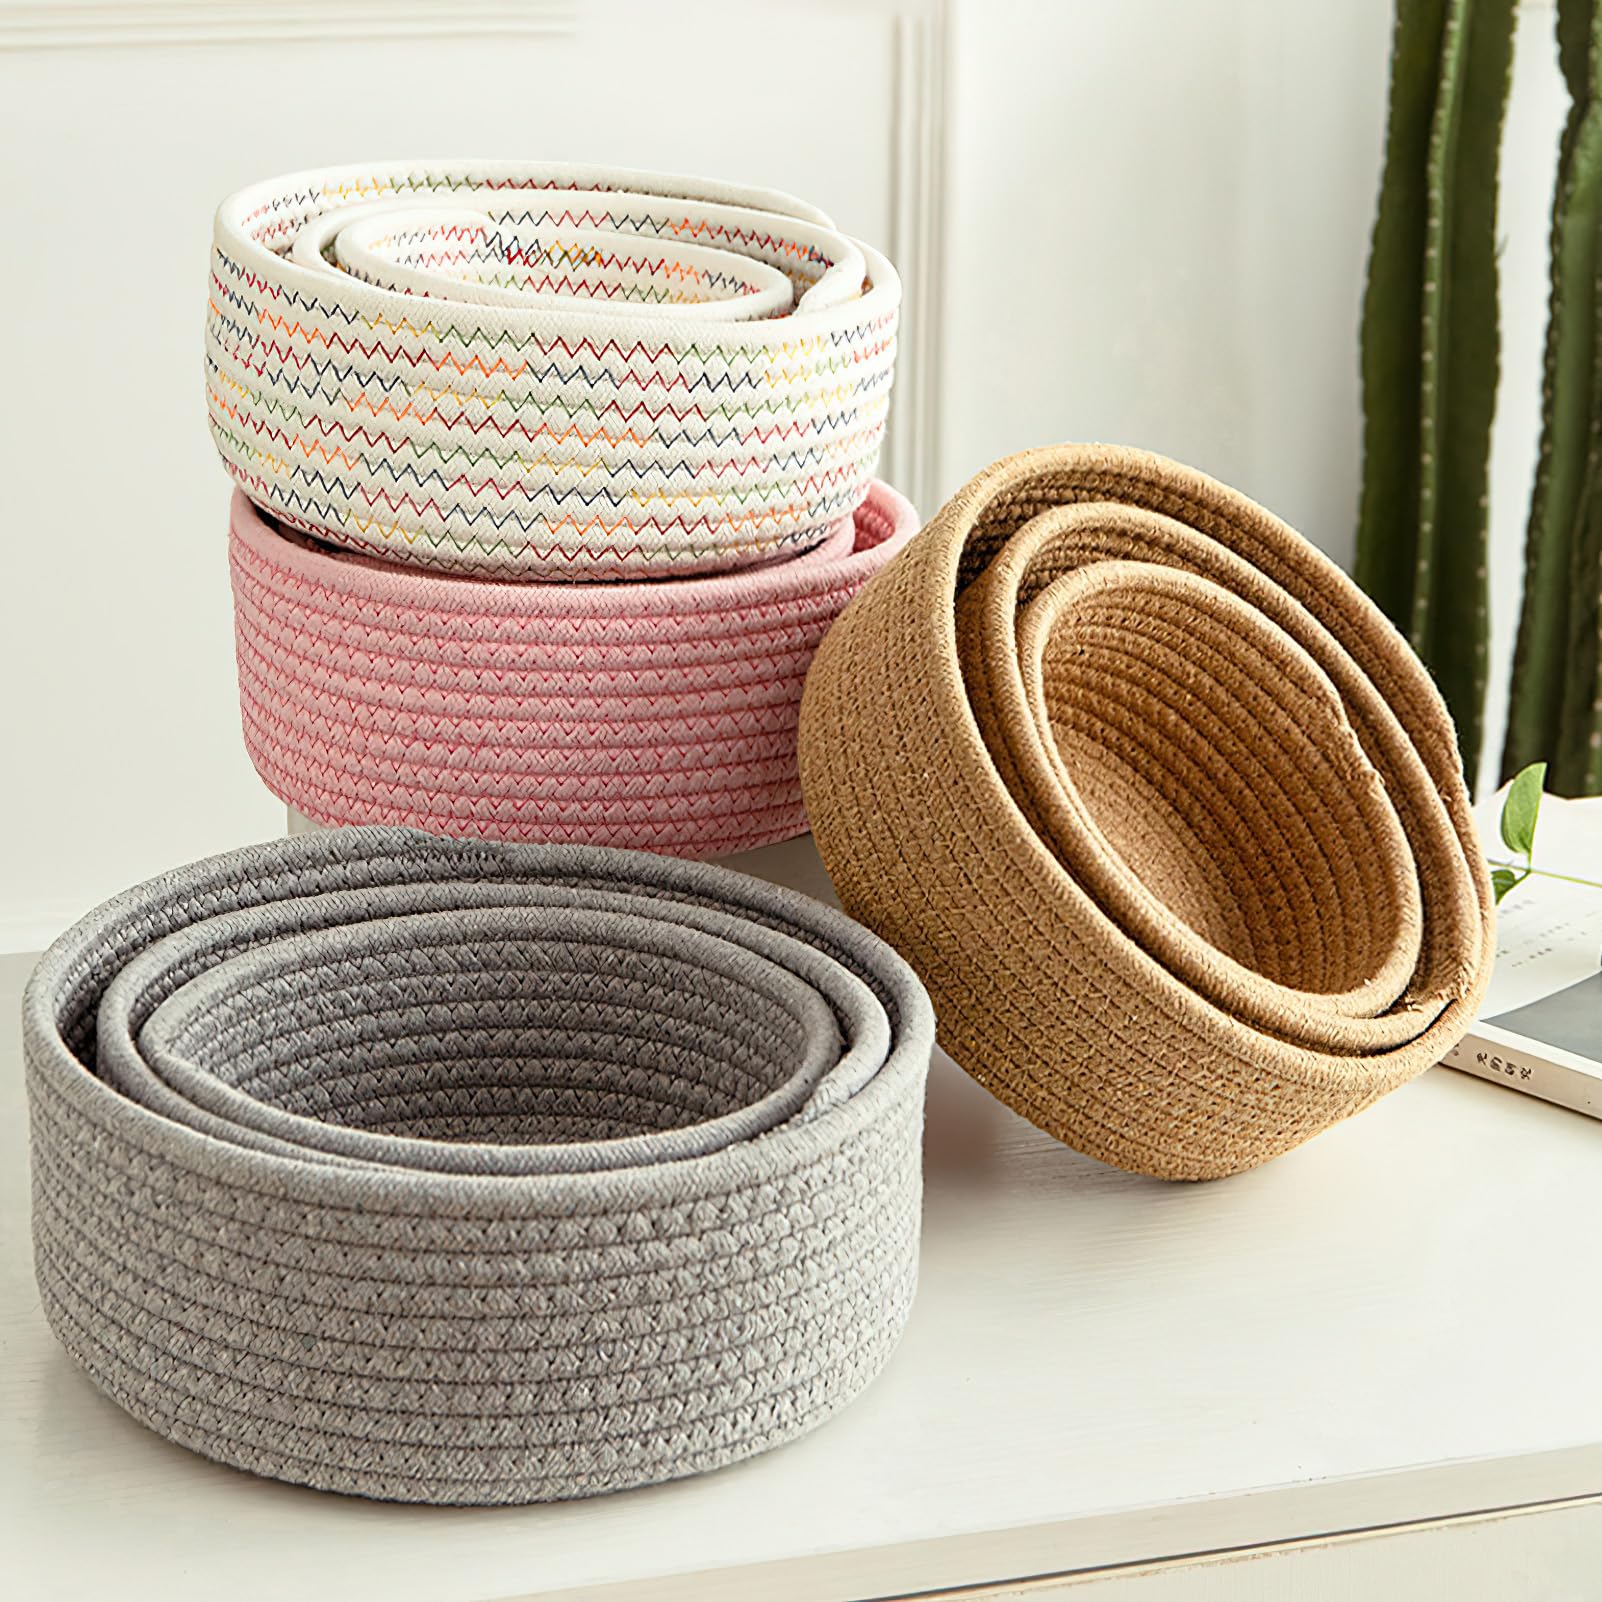 3-Piece Small Round Storage Basket Set Cotton Rope Woven Basket for Organizing, Key Tray, Nesting Bins Storage Organizer for Shelves, Closet, Counters, Entryway, Pink